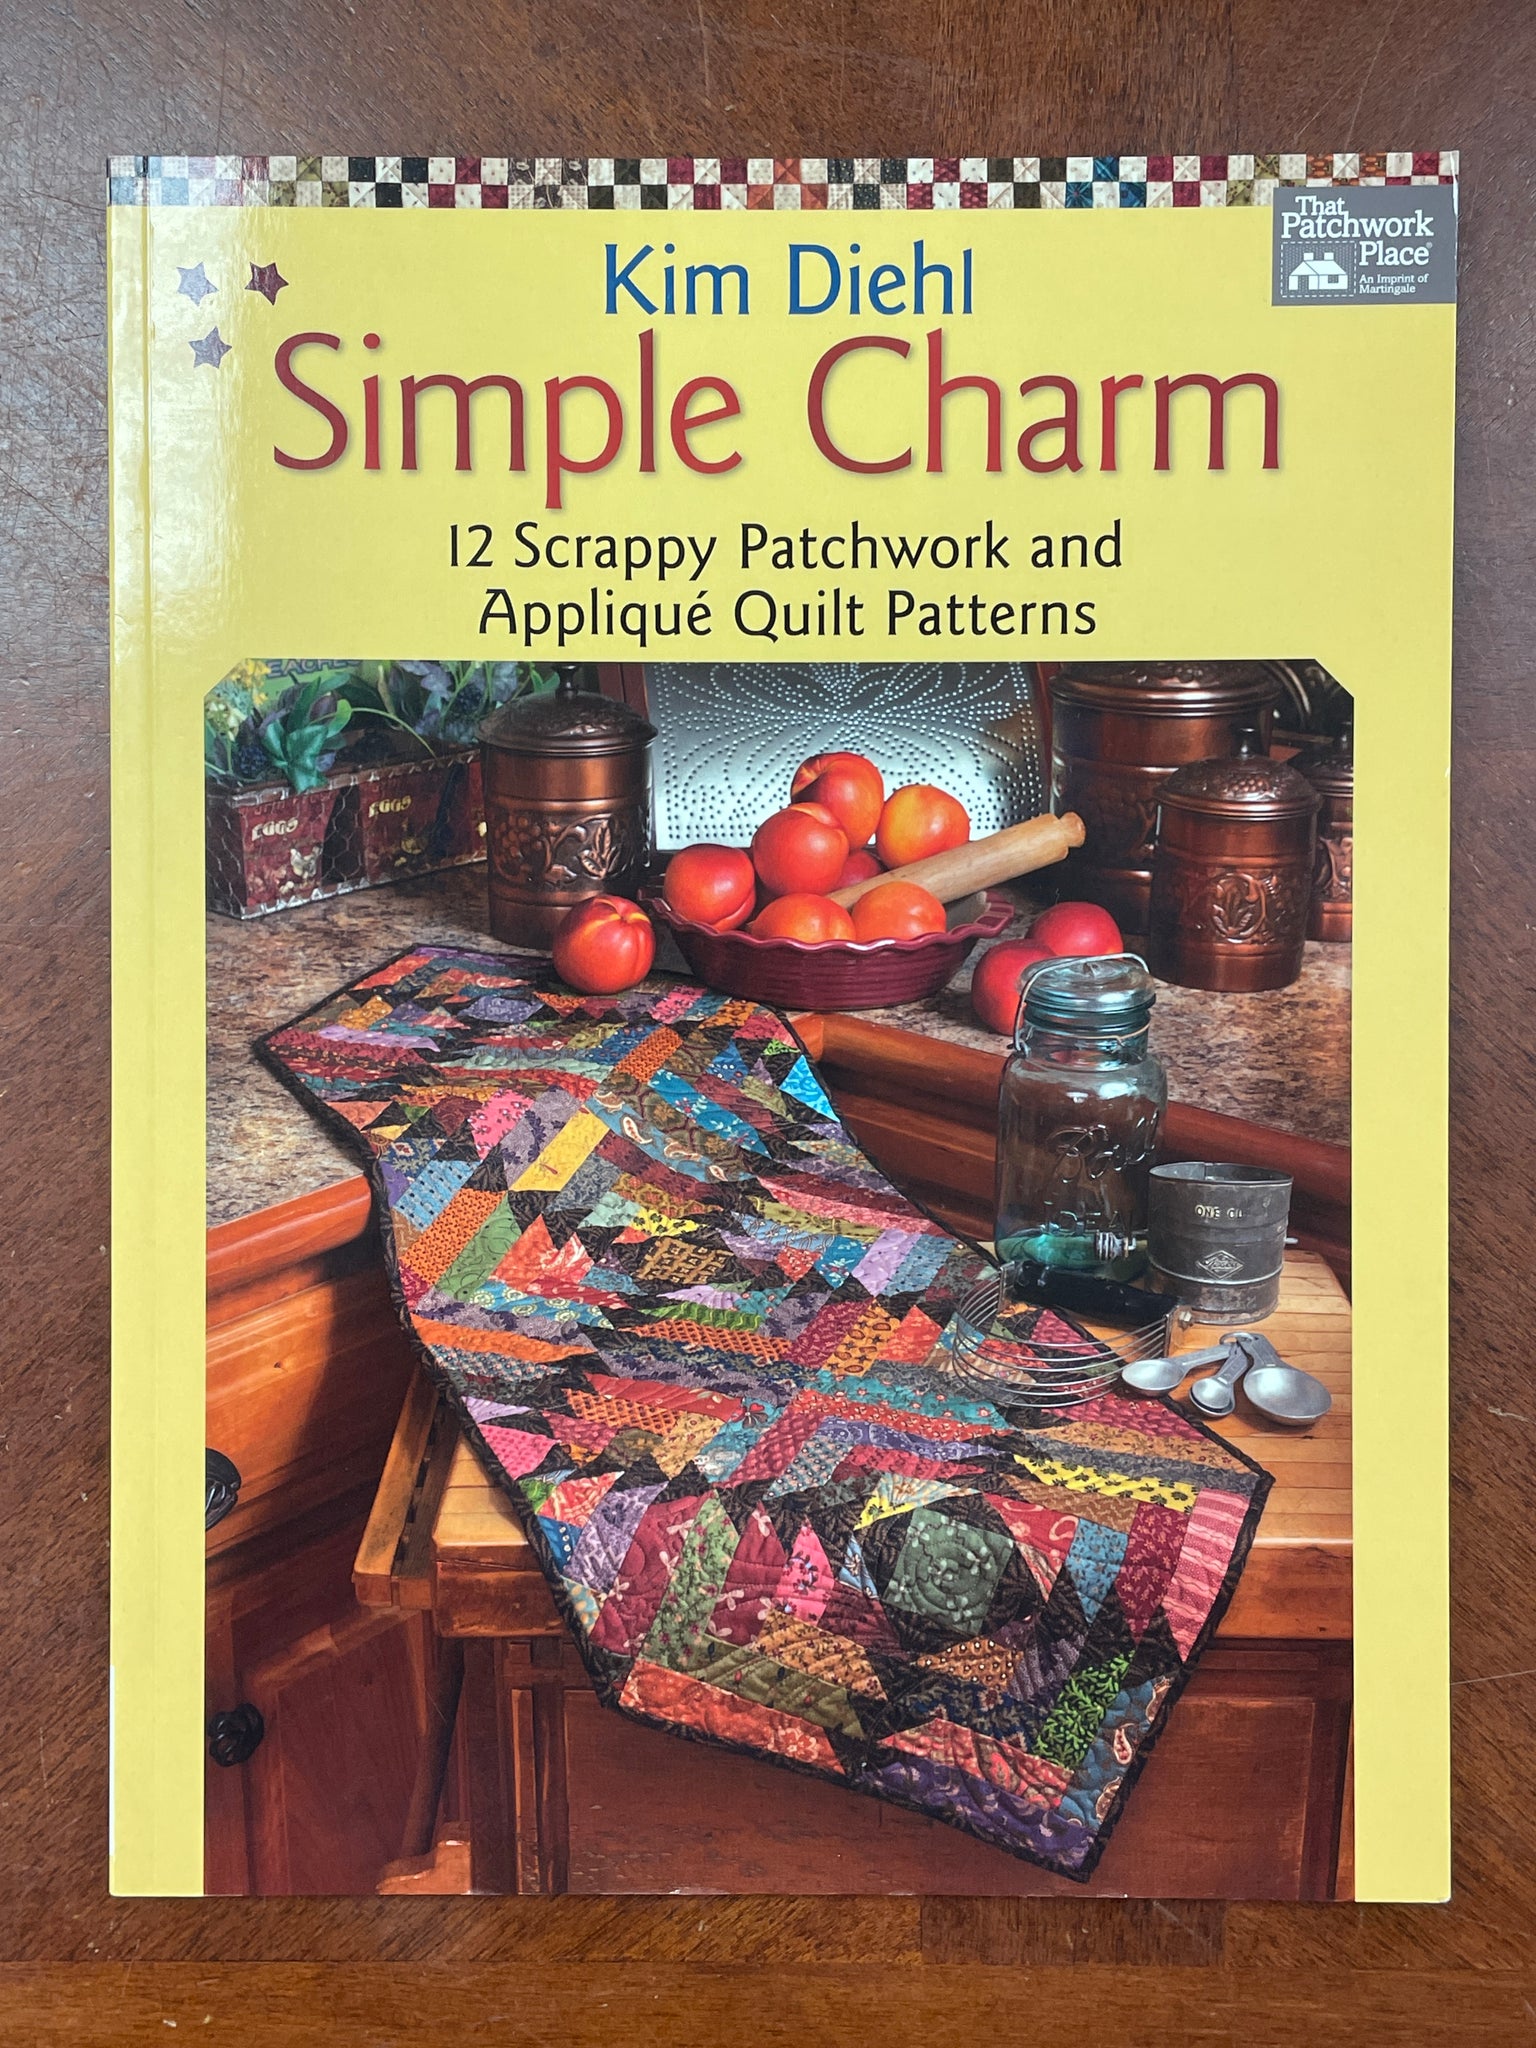 2012 Quilting Book - "Simple Charm"